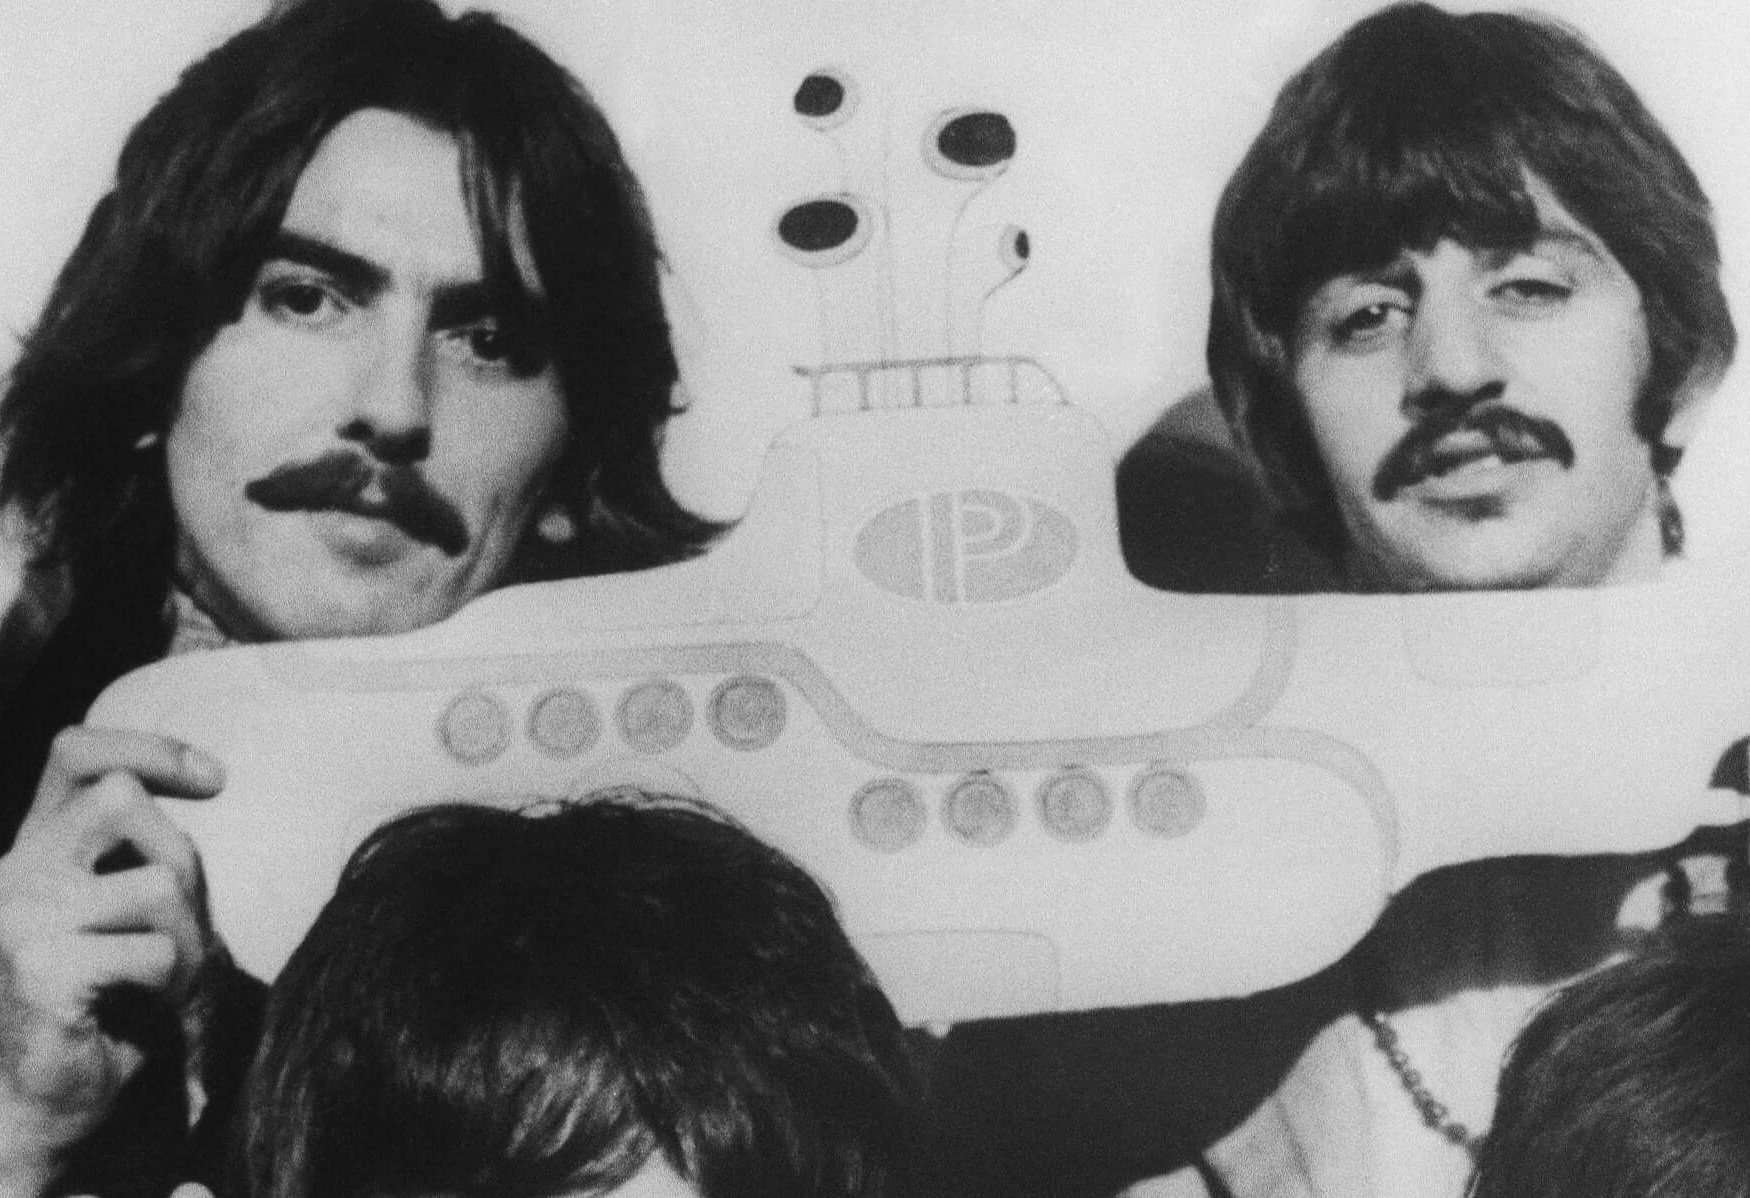 George Harrison and Ringo Starr holding The Beatles' yellow submarine